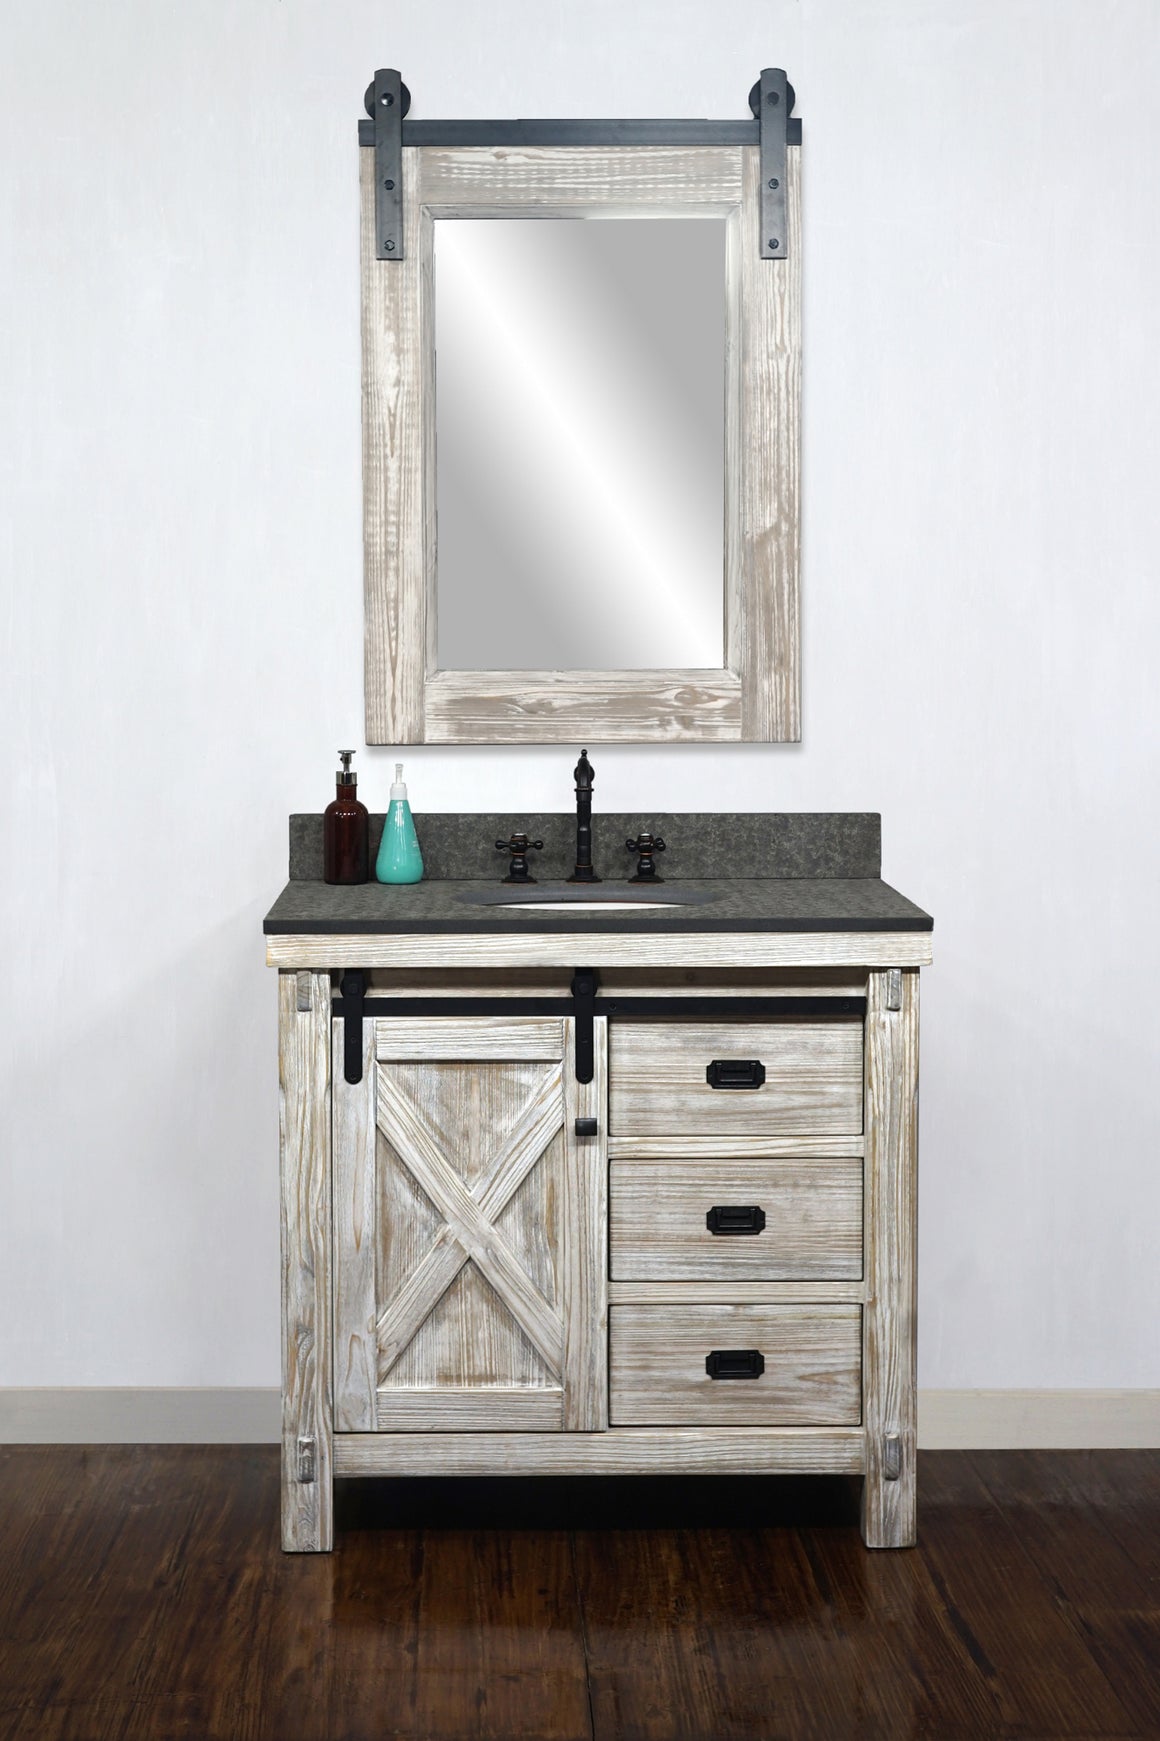 36"RUSTIC SOLID FIR BARN DOOR STYLE SINGLE SINK VANITY IN WHITE WASH WITH RUSTIC STYLE POLISHED TEXTURED SURFACE GRANITE TOP IN MATTE GREY-NO FAUCET